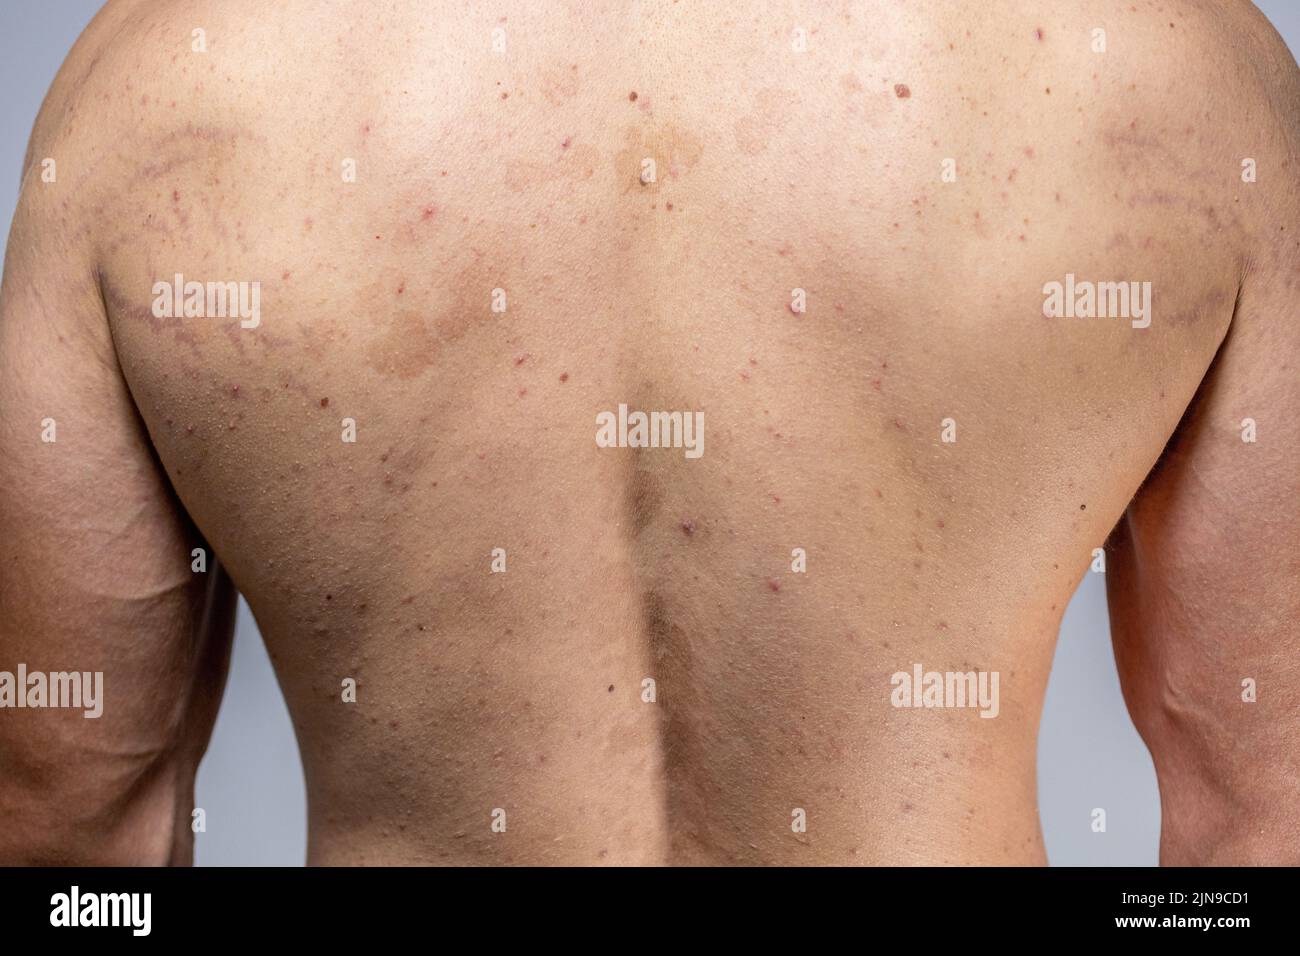 tinea versicolor on the back. pityriasis versicolor problem with